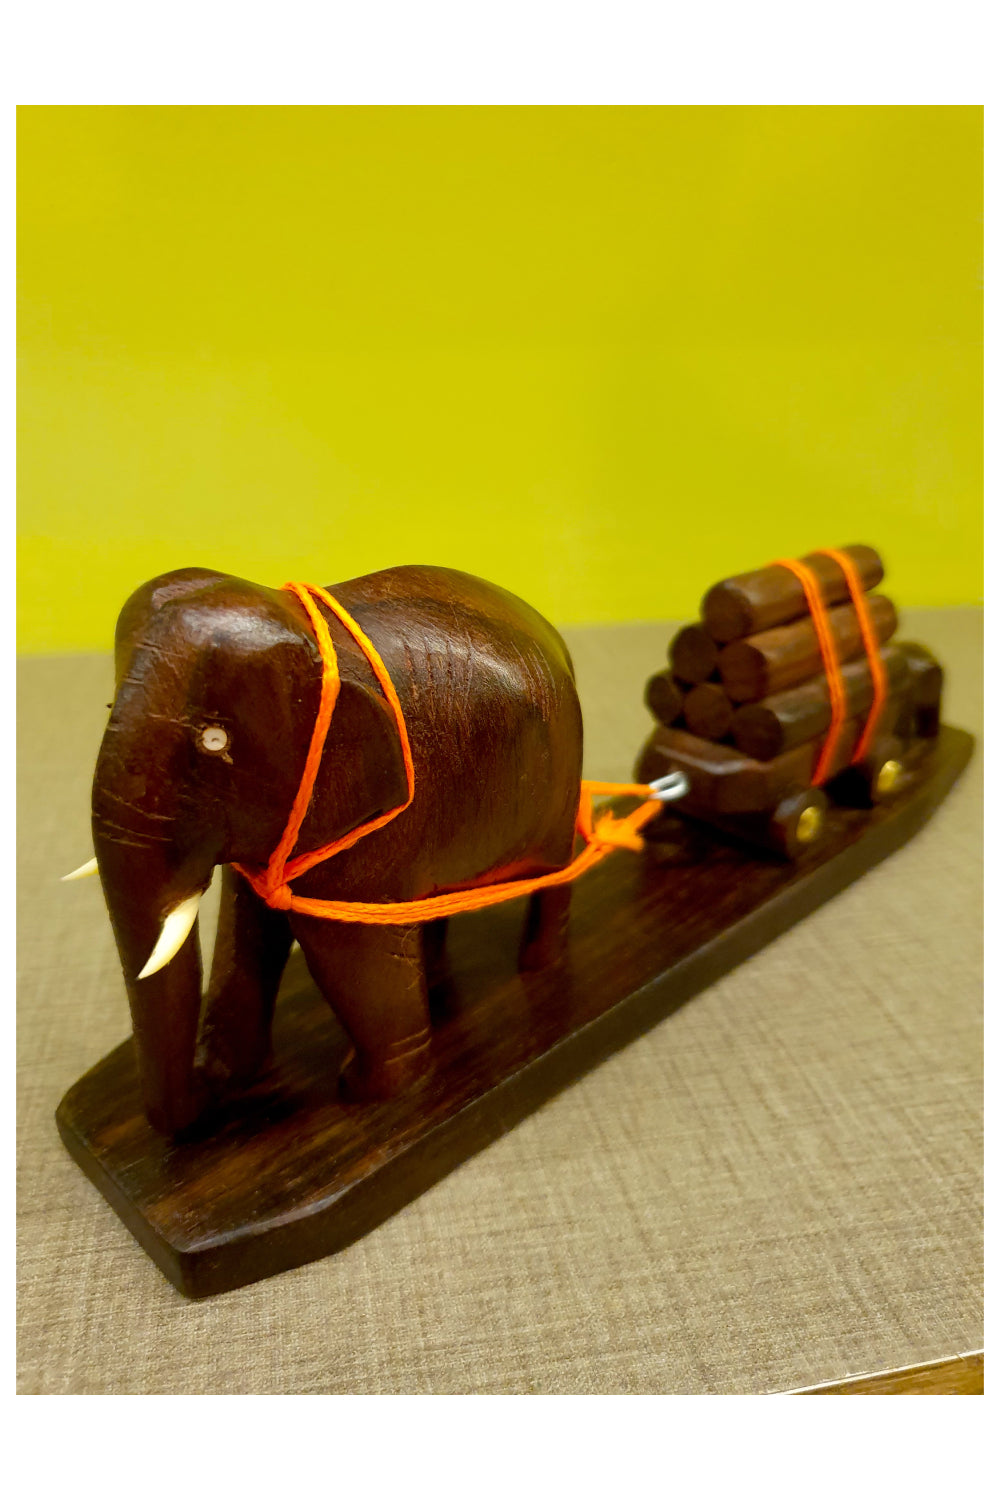 Southloom Handmade Elephant Handicraft (Carved from Rose Wood) 3 Inches